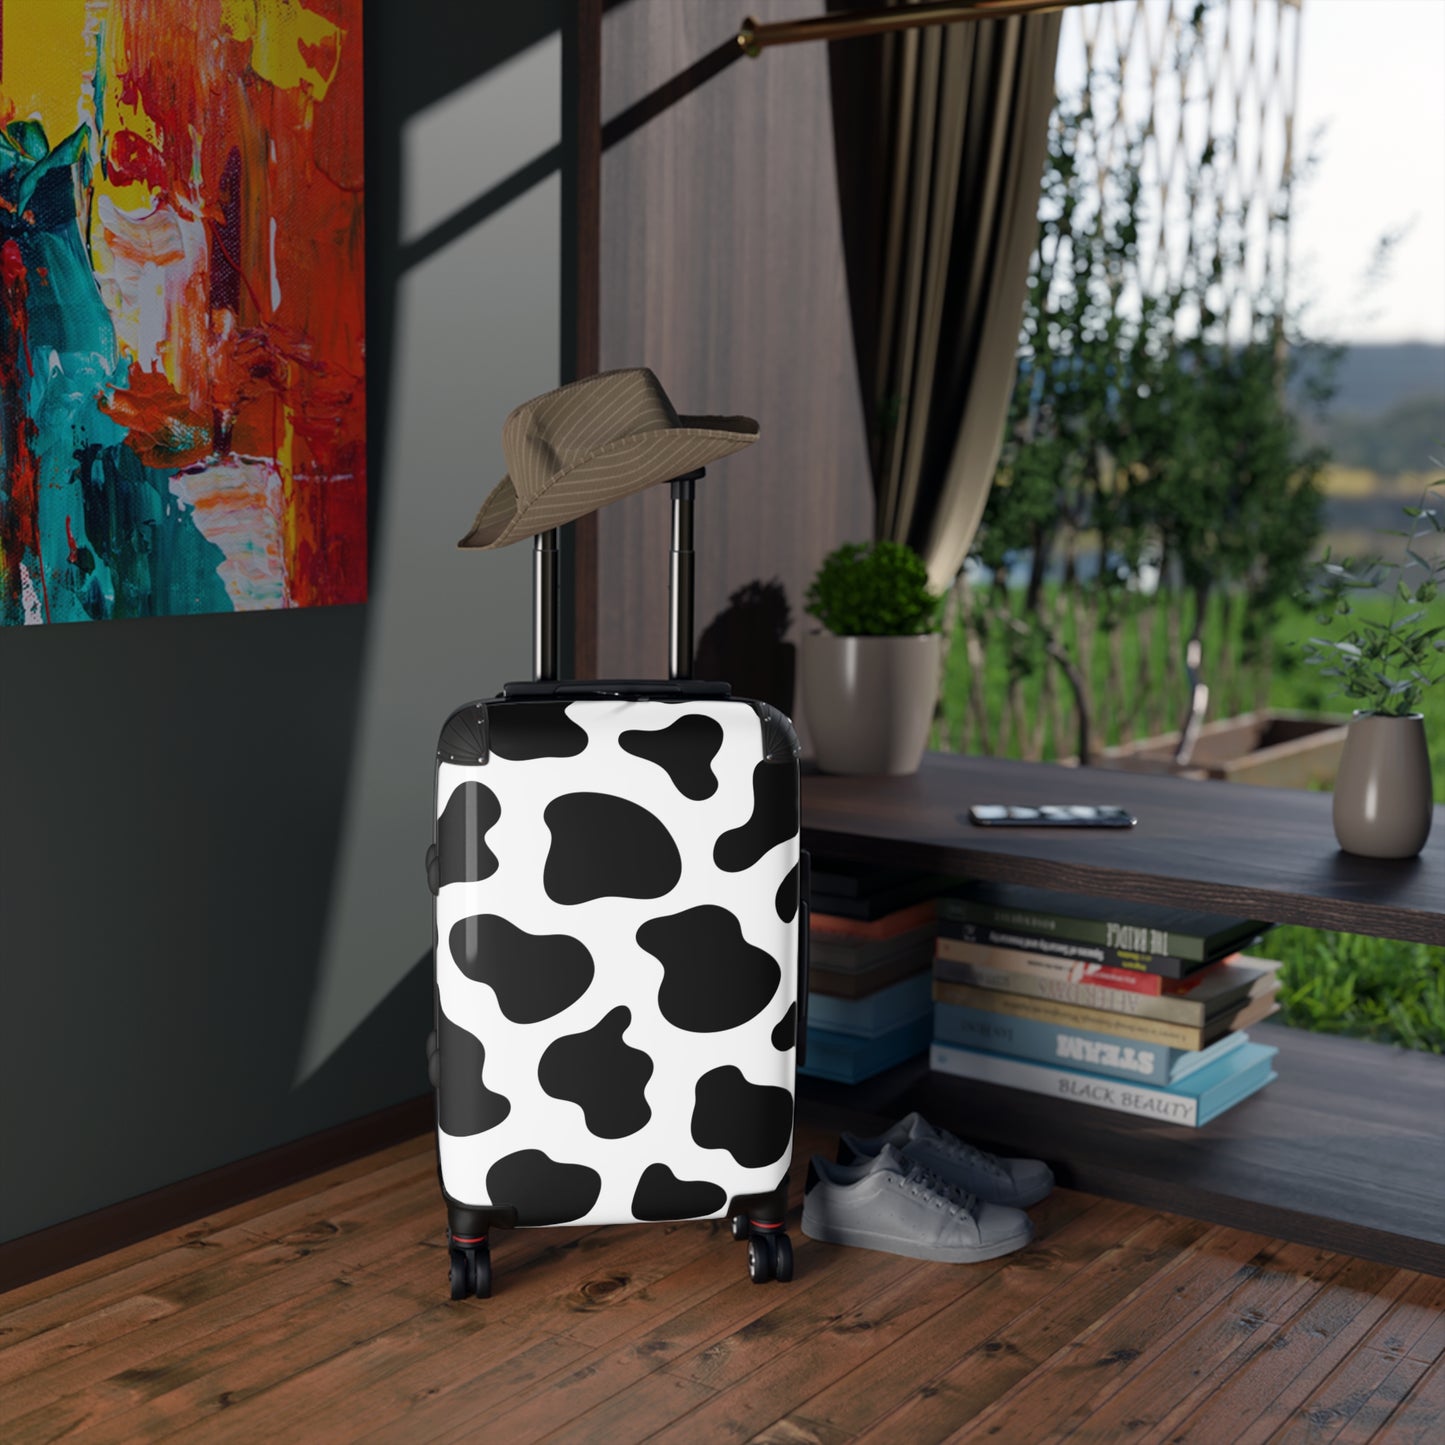 Cow Print Suitcase Luggage, Black White Carry On With 4 Wheels Cabin Travel Small Large Set Rolling Spinner Designer Hard Shell Case Starcove Fashion